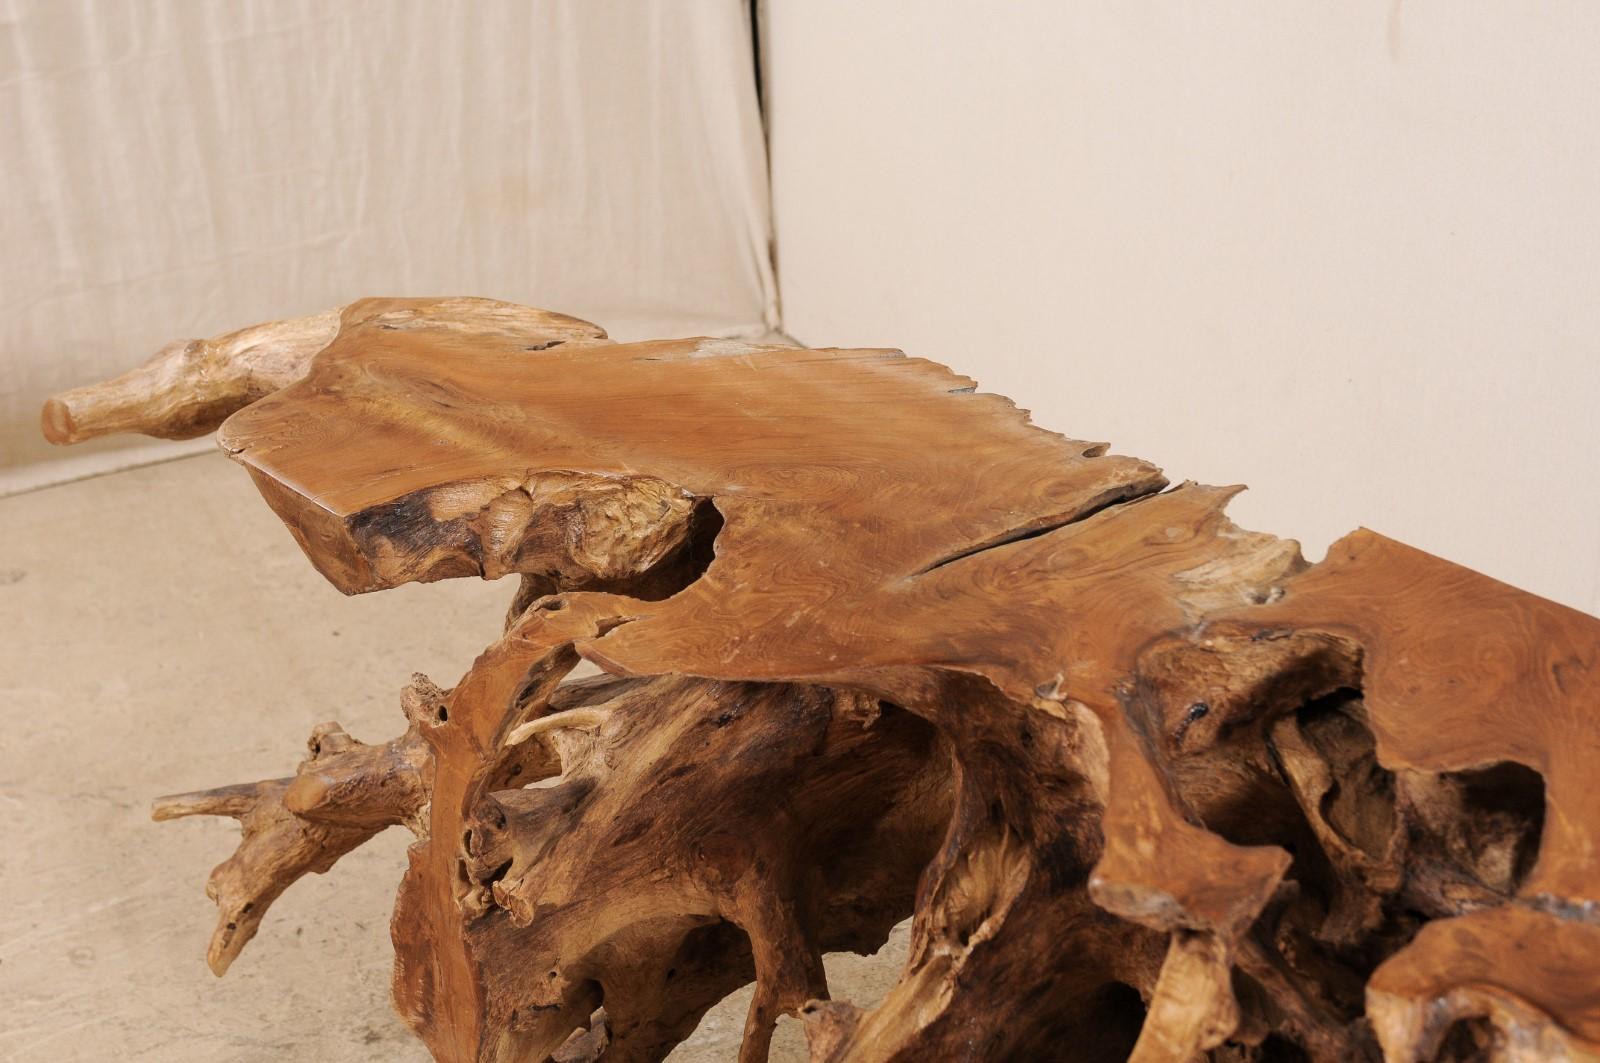 Wood A 6+ Ft Long Natural Teak Root Console Table- An Art Piece by Mother Nature!